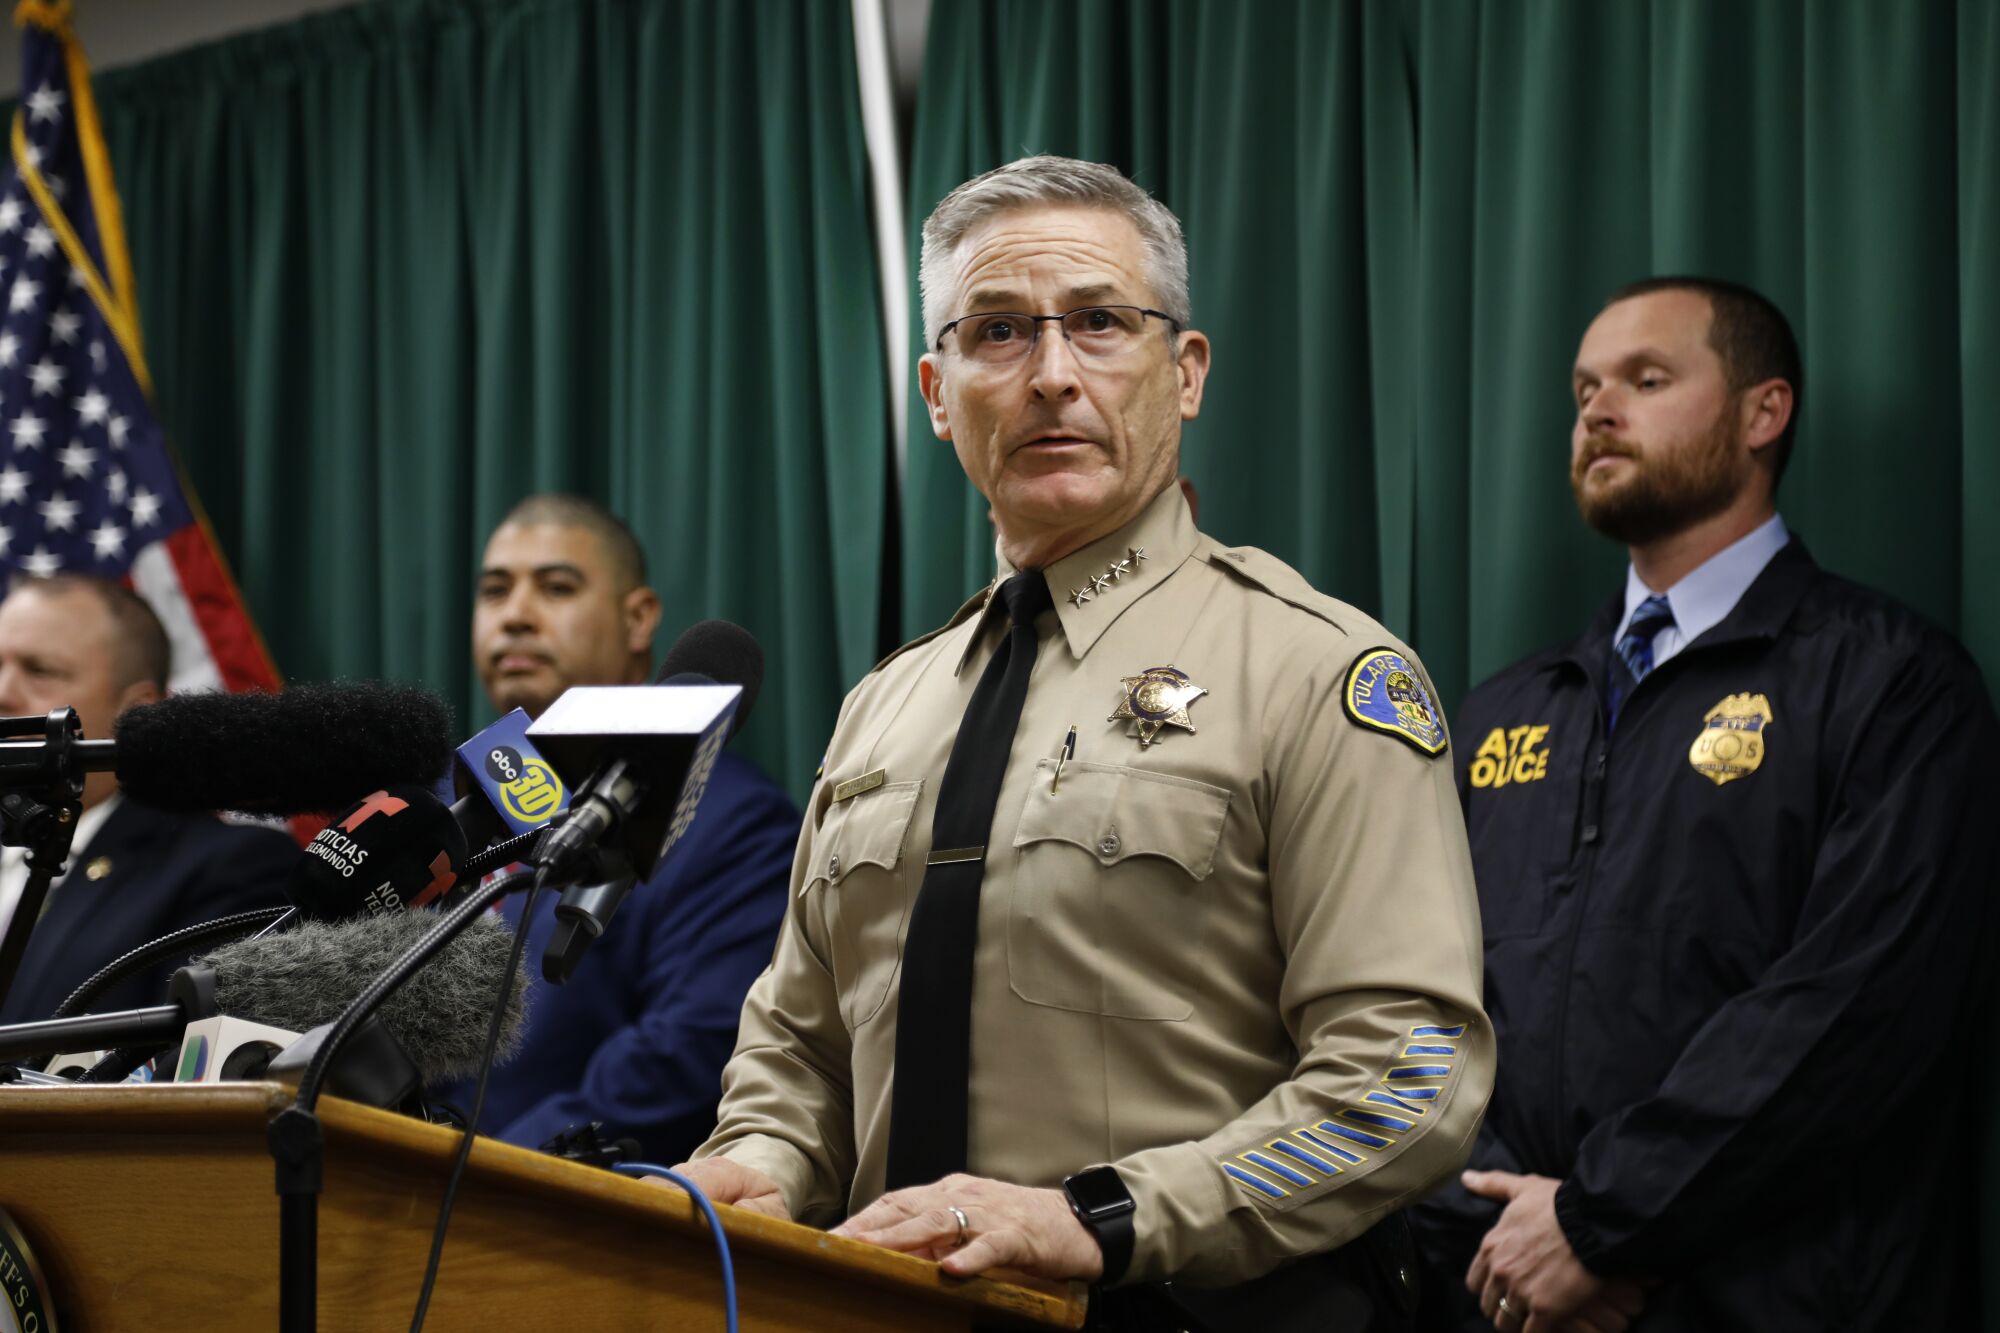 Tulare County Sheriff Mike Boudreaux speaking at a lectern during a news conference